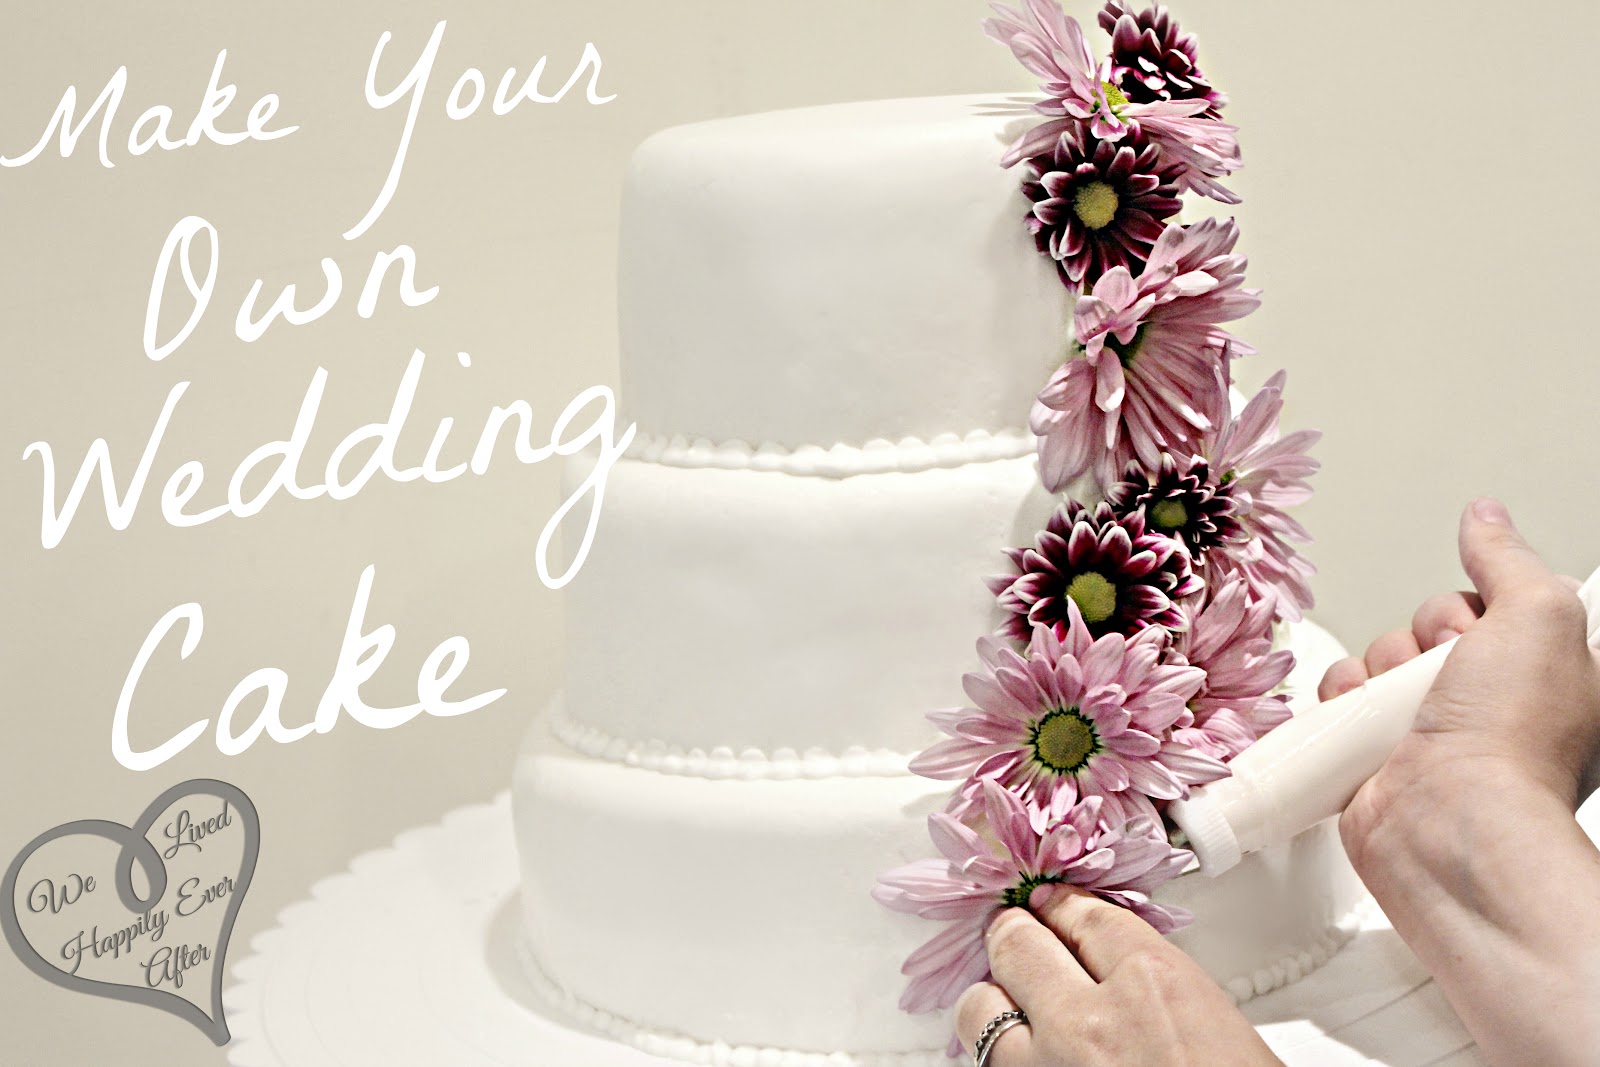 How to Bake a Wedding  Cake  using a Cake  Box  Mix  Part 2 